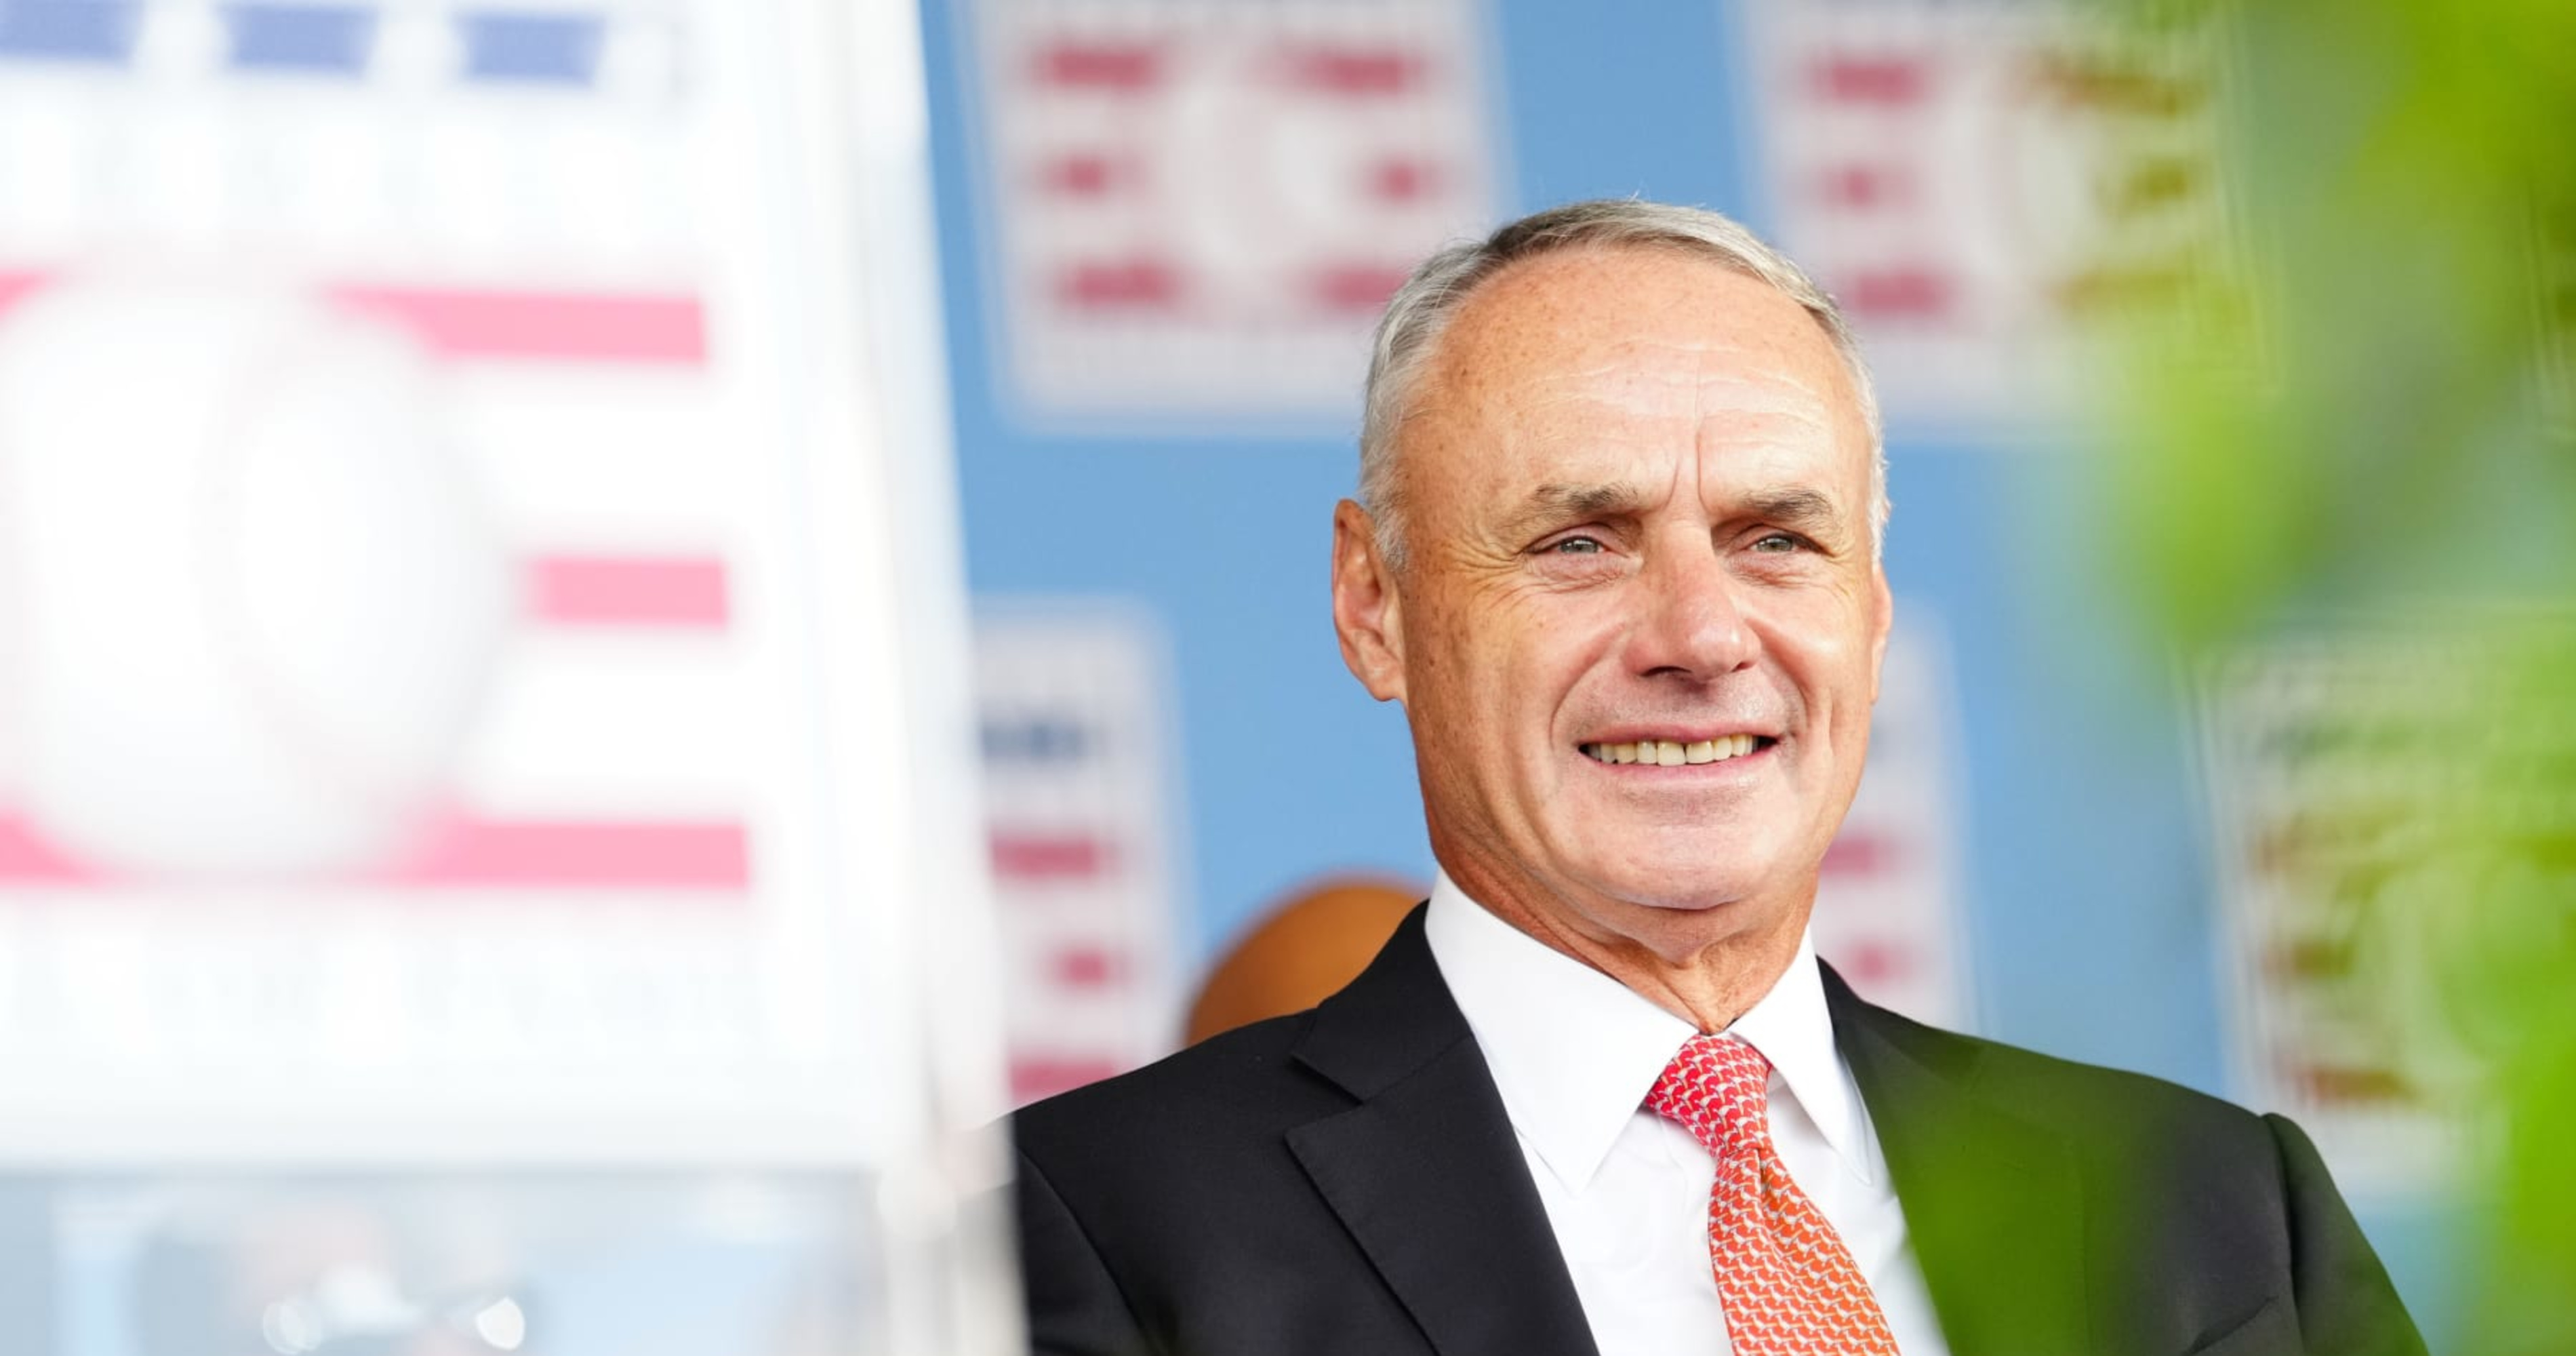 MLB commissioner regrets giving immunity to Houston Astros players